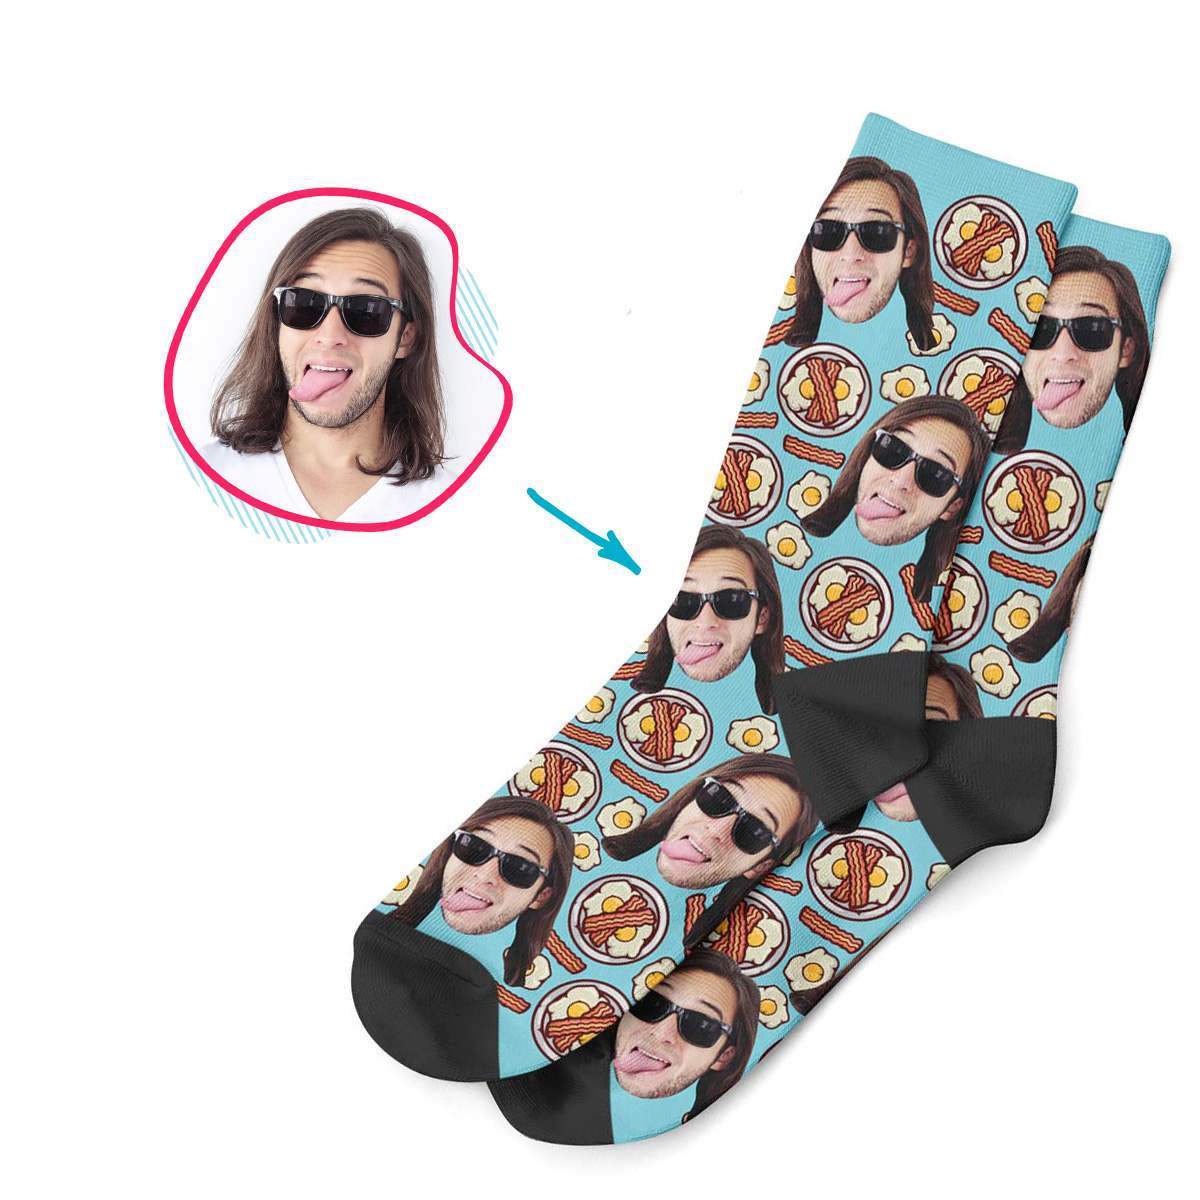 Bacon and Eggs Personalized Socks